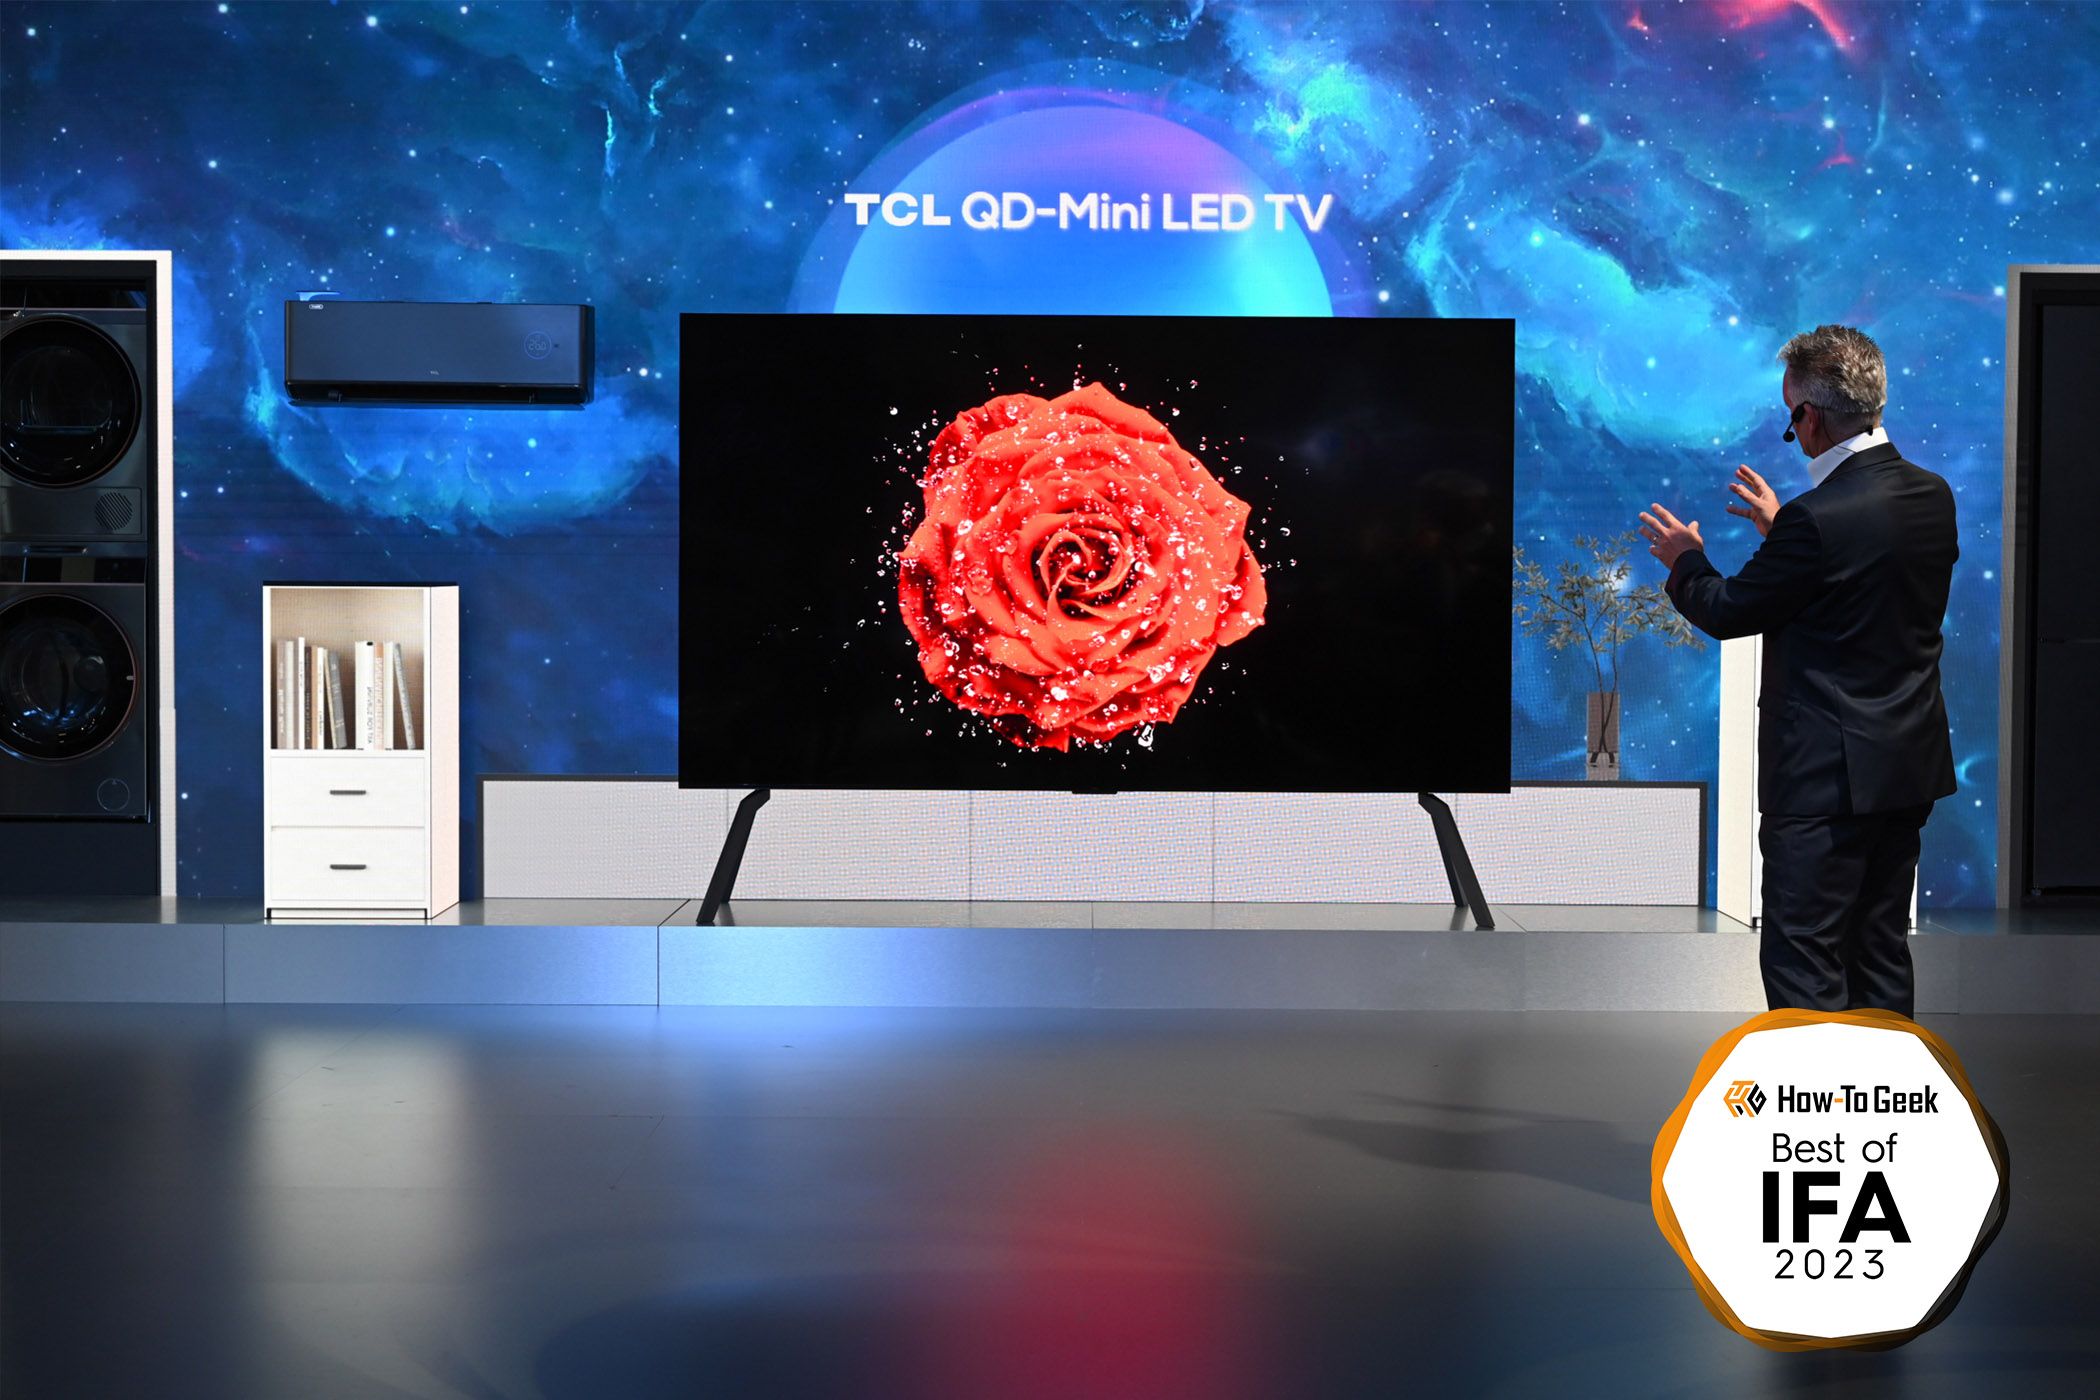 A man standing in front of a large TCL TV